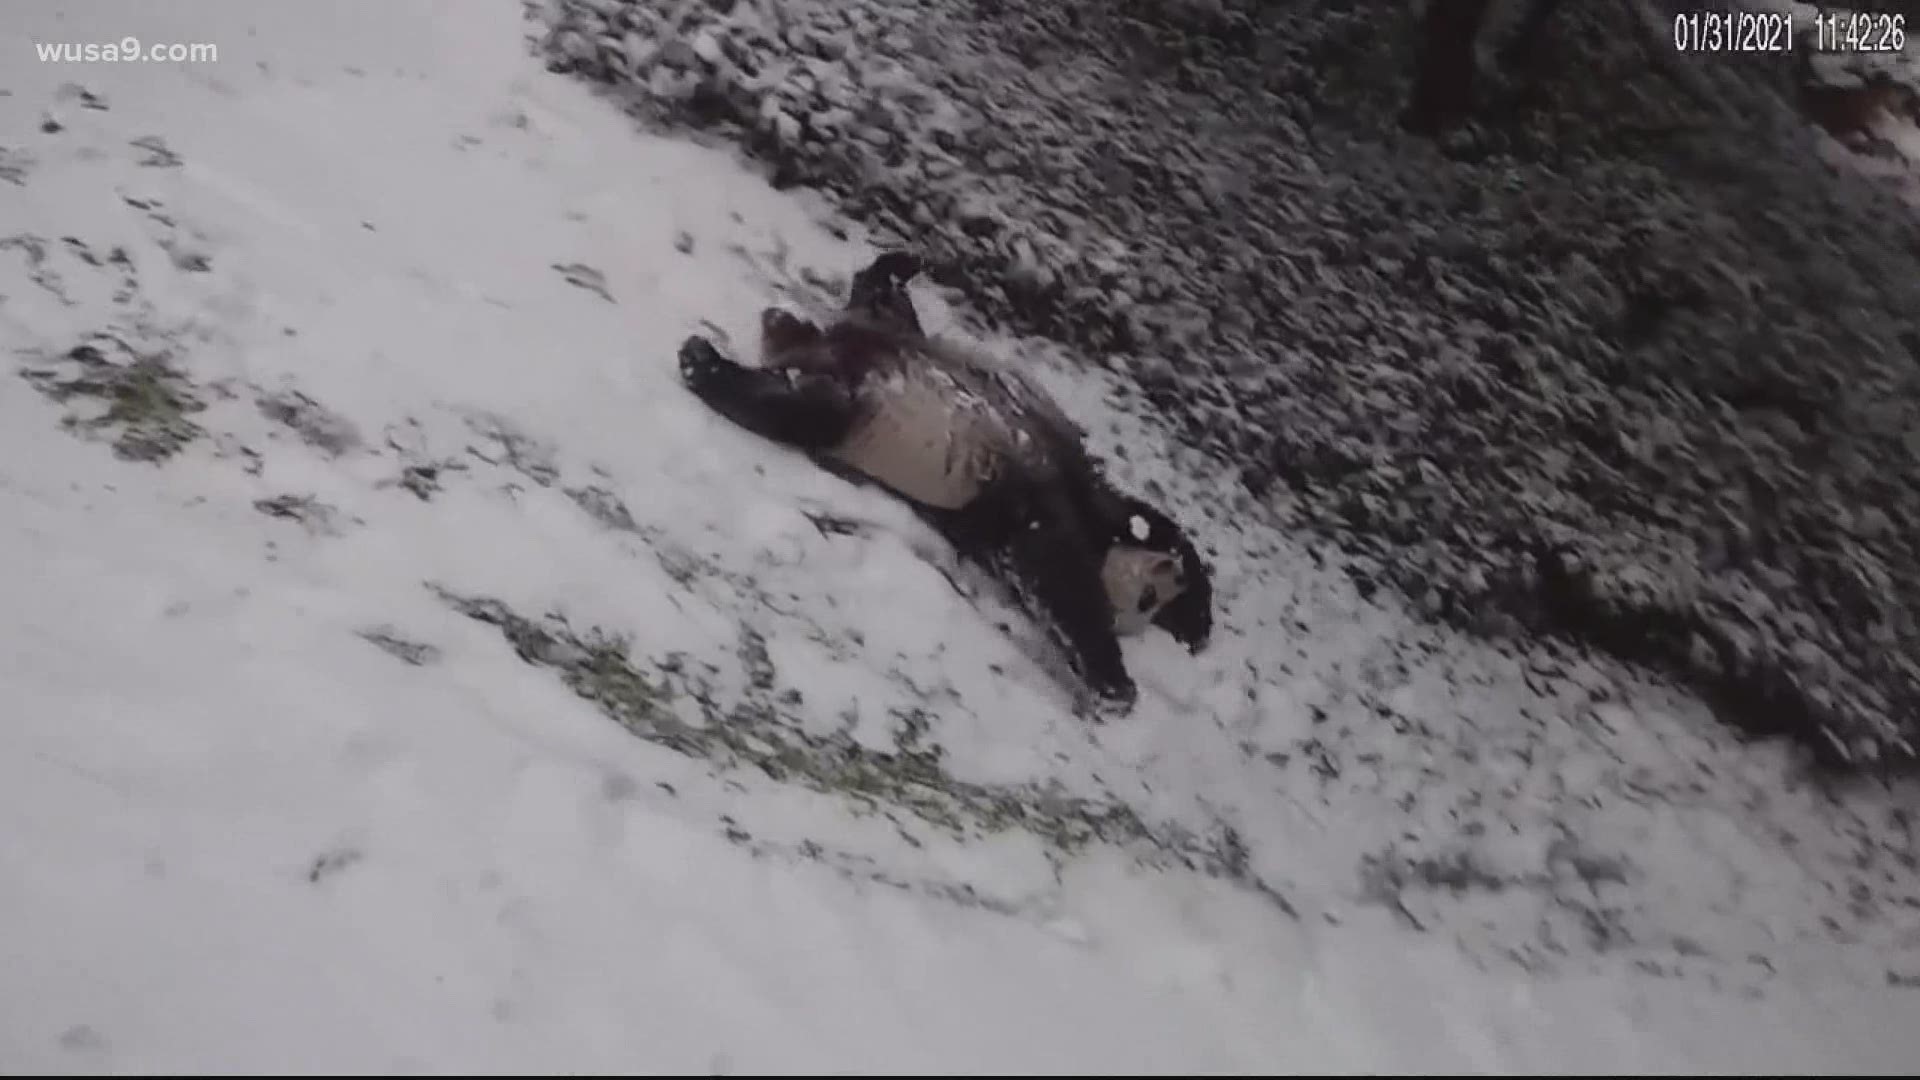 The pandas had a ball in the snow Sunday.